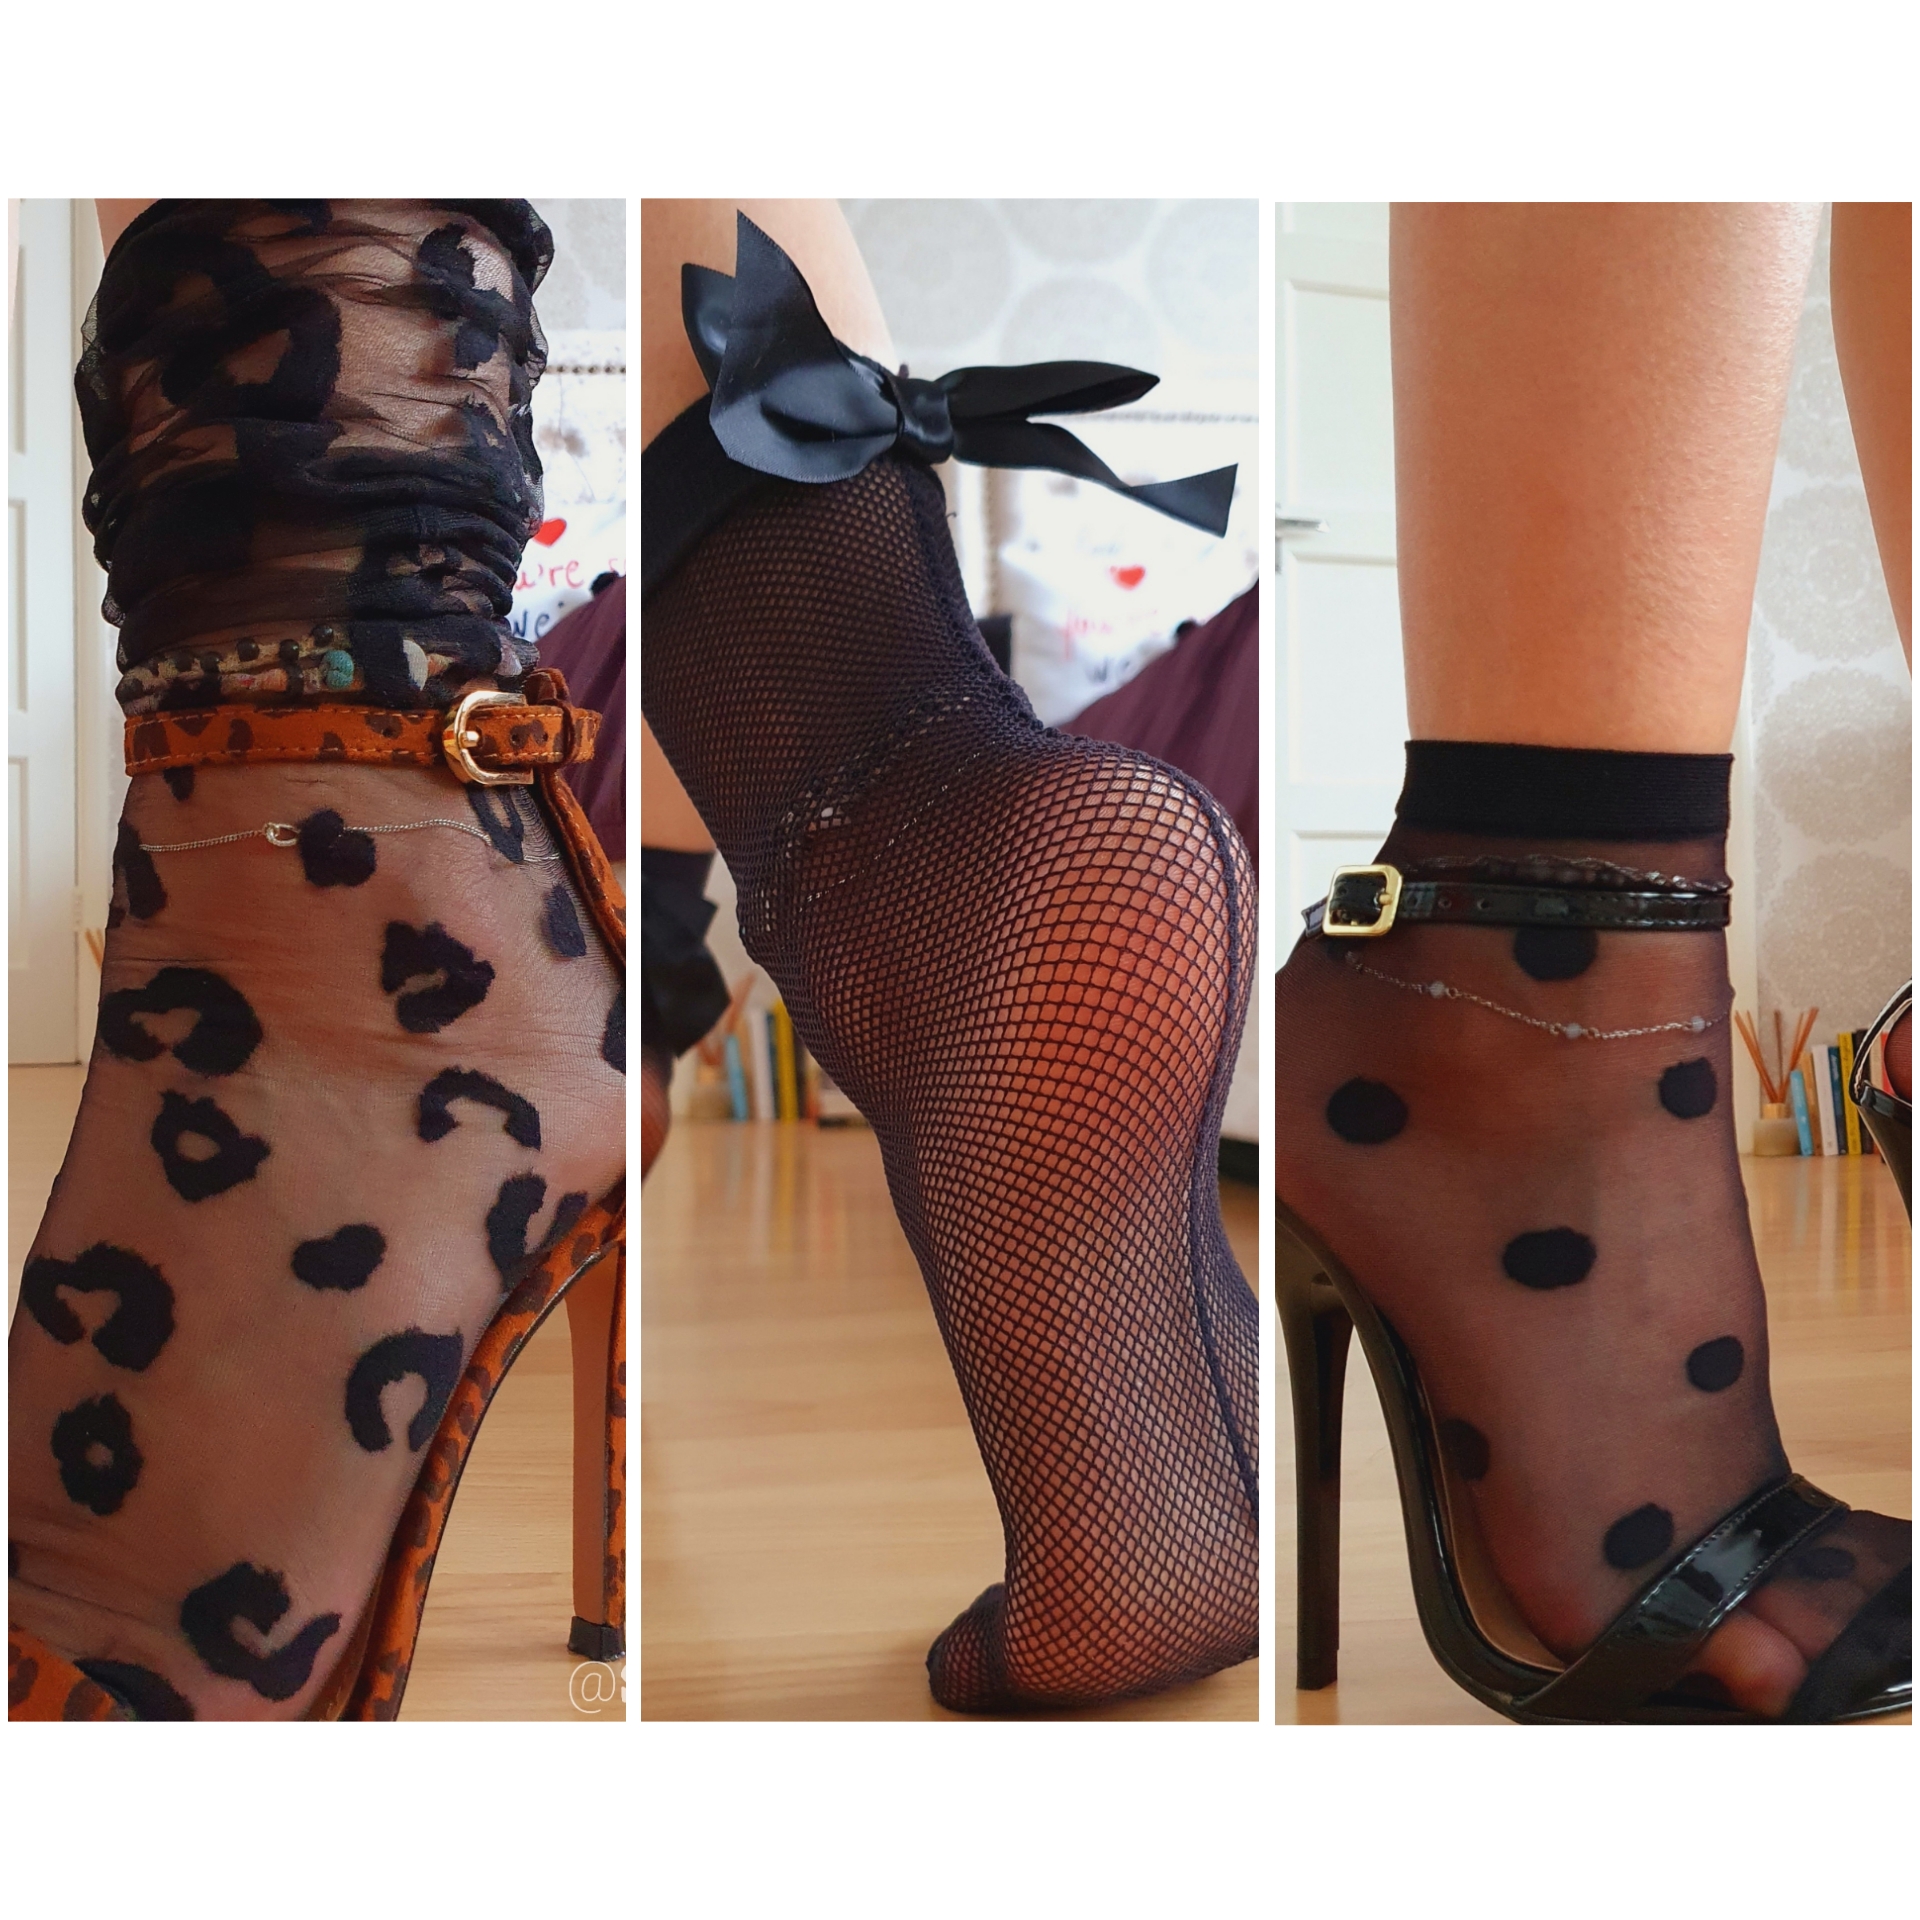 Carra Hosiery Socks Collection: See My Bow, Polka Dot Anklet & Leopard Pawse